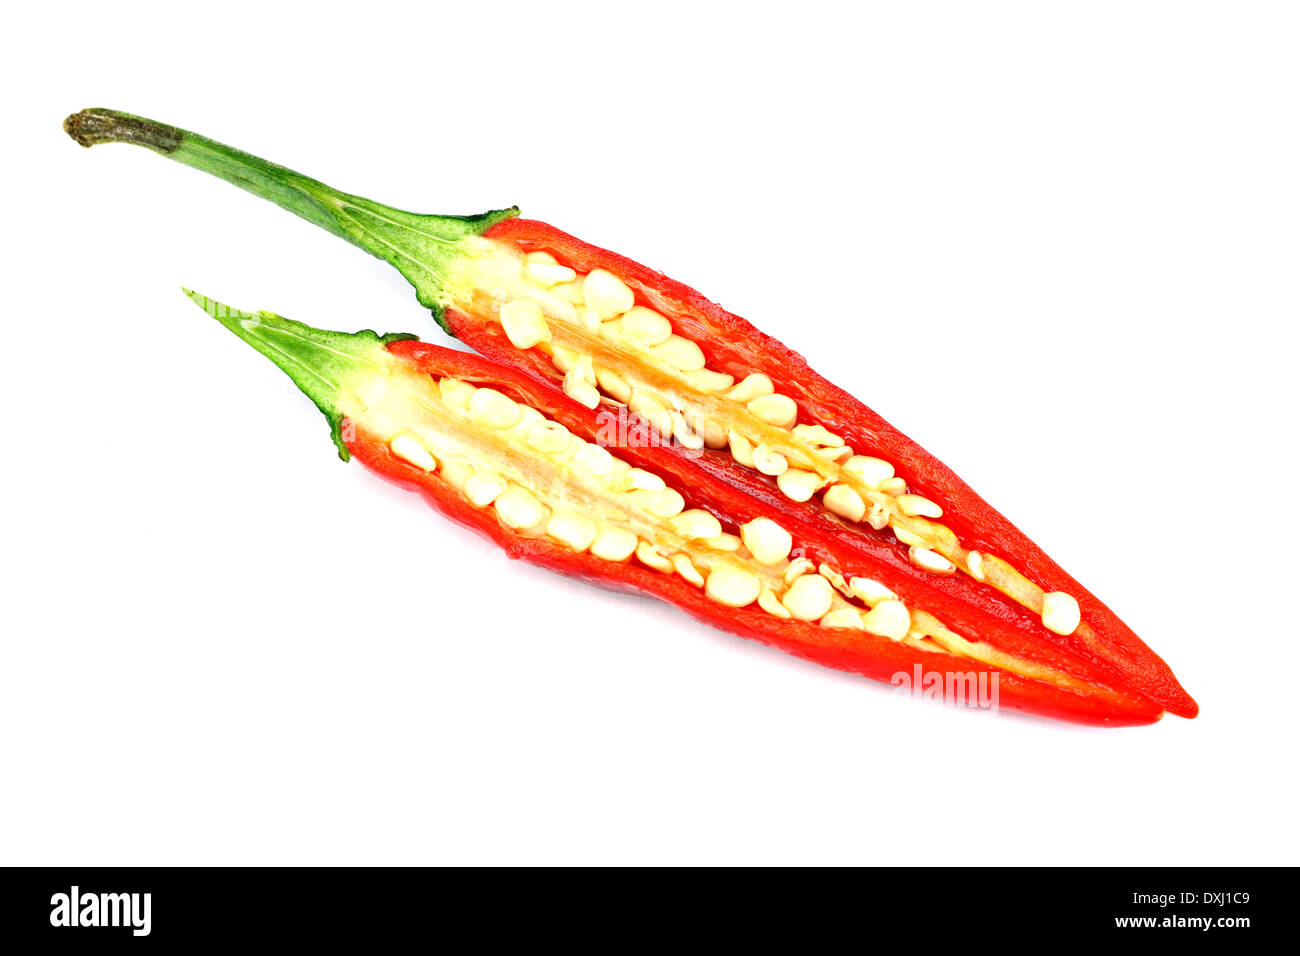 slices of red pepper chili isolated on white background. Stock Photo